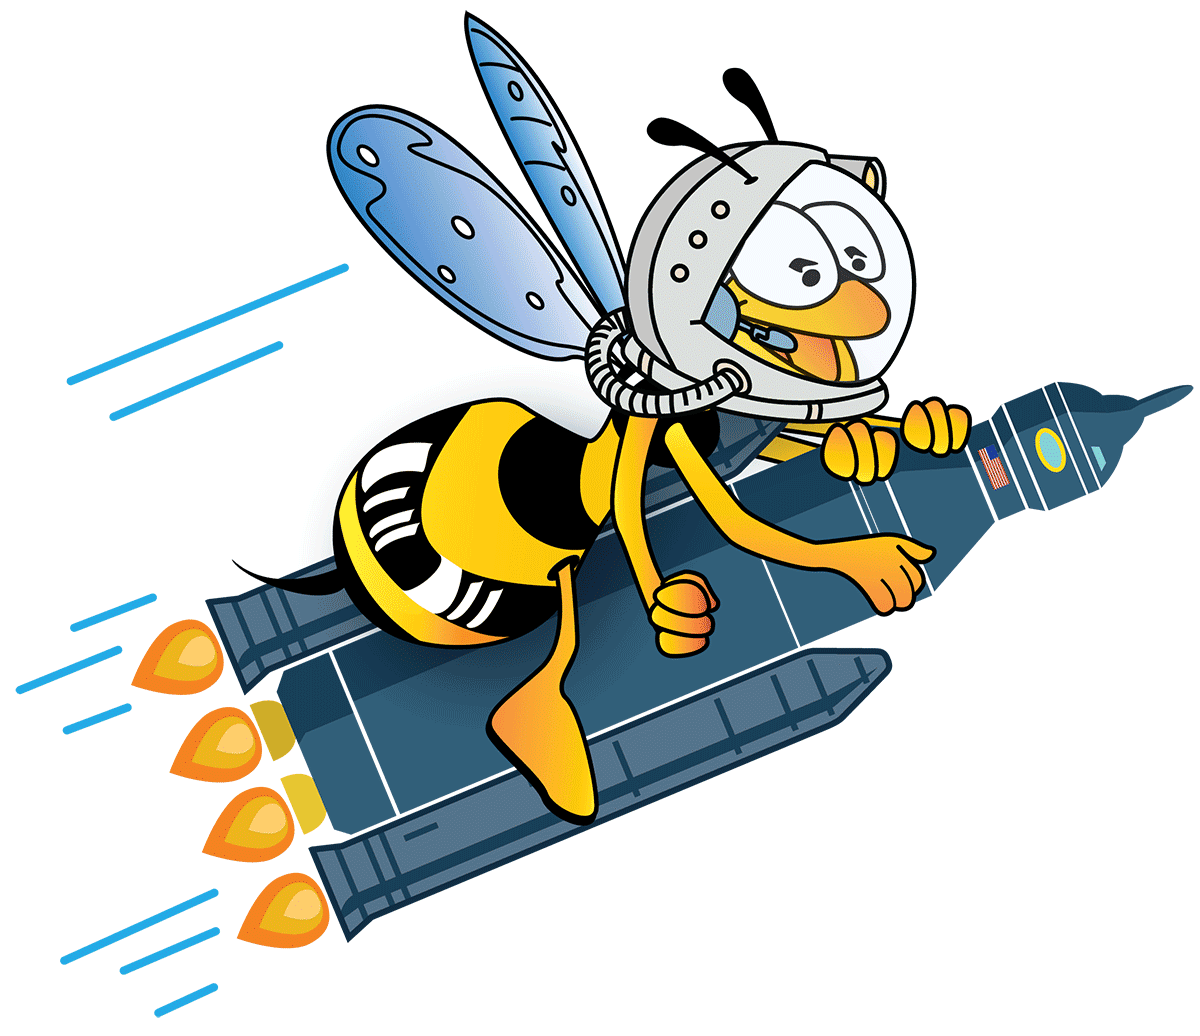 "Illustration of a bee wearing a space helmet, riding on the back of a flying rocket space ship."